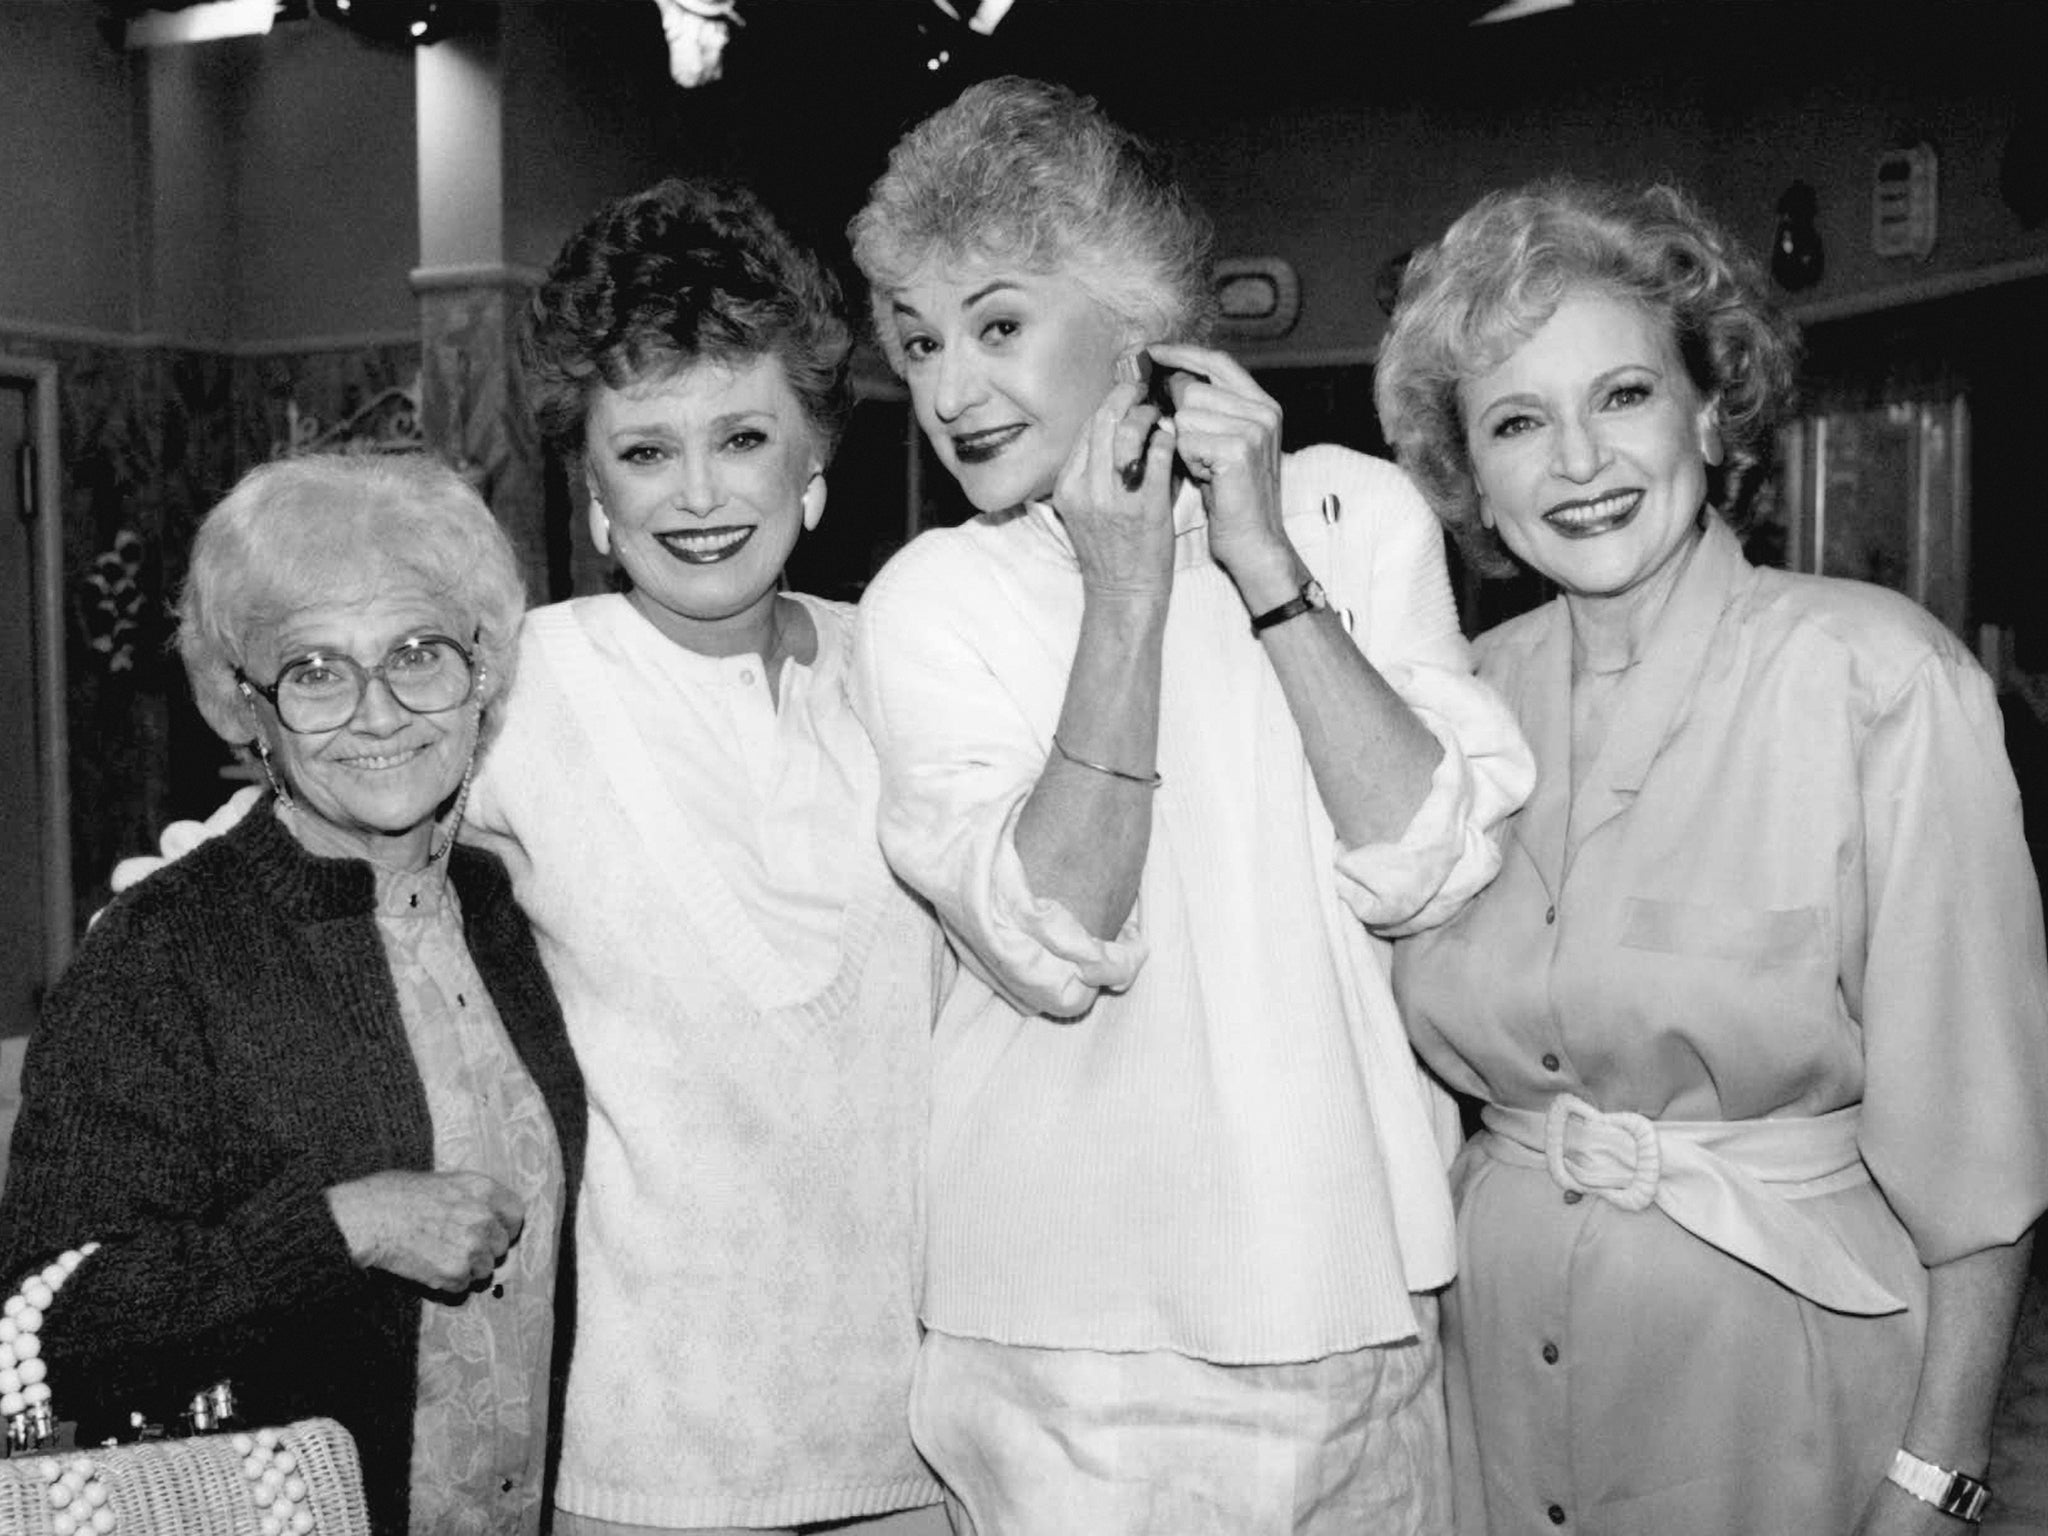 ‘The Golden Girls’ cast in 1985, with White on the right